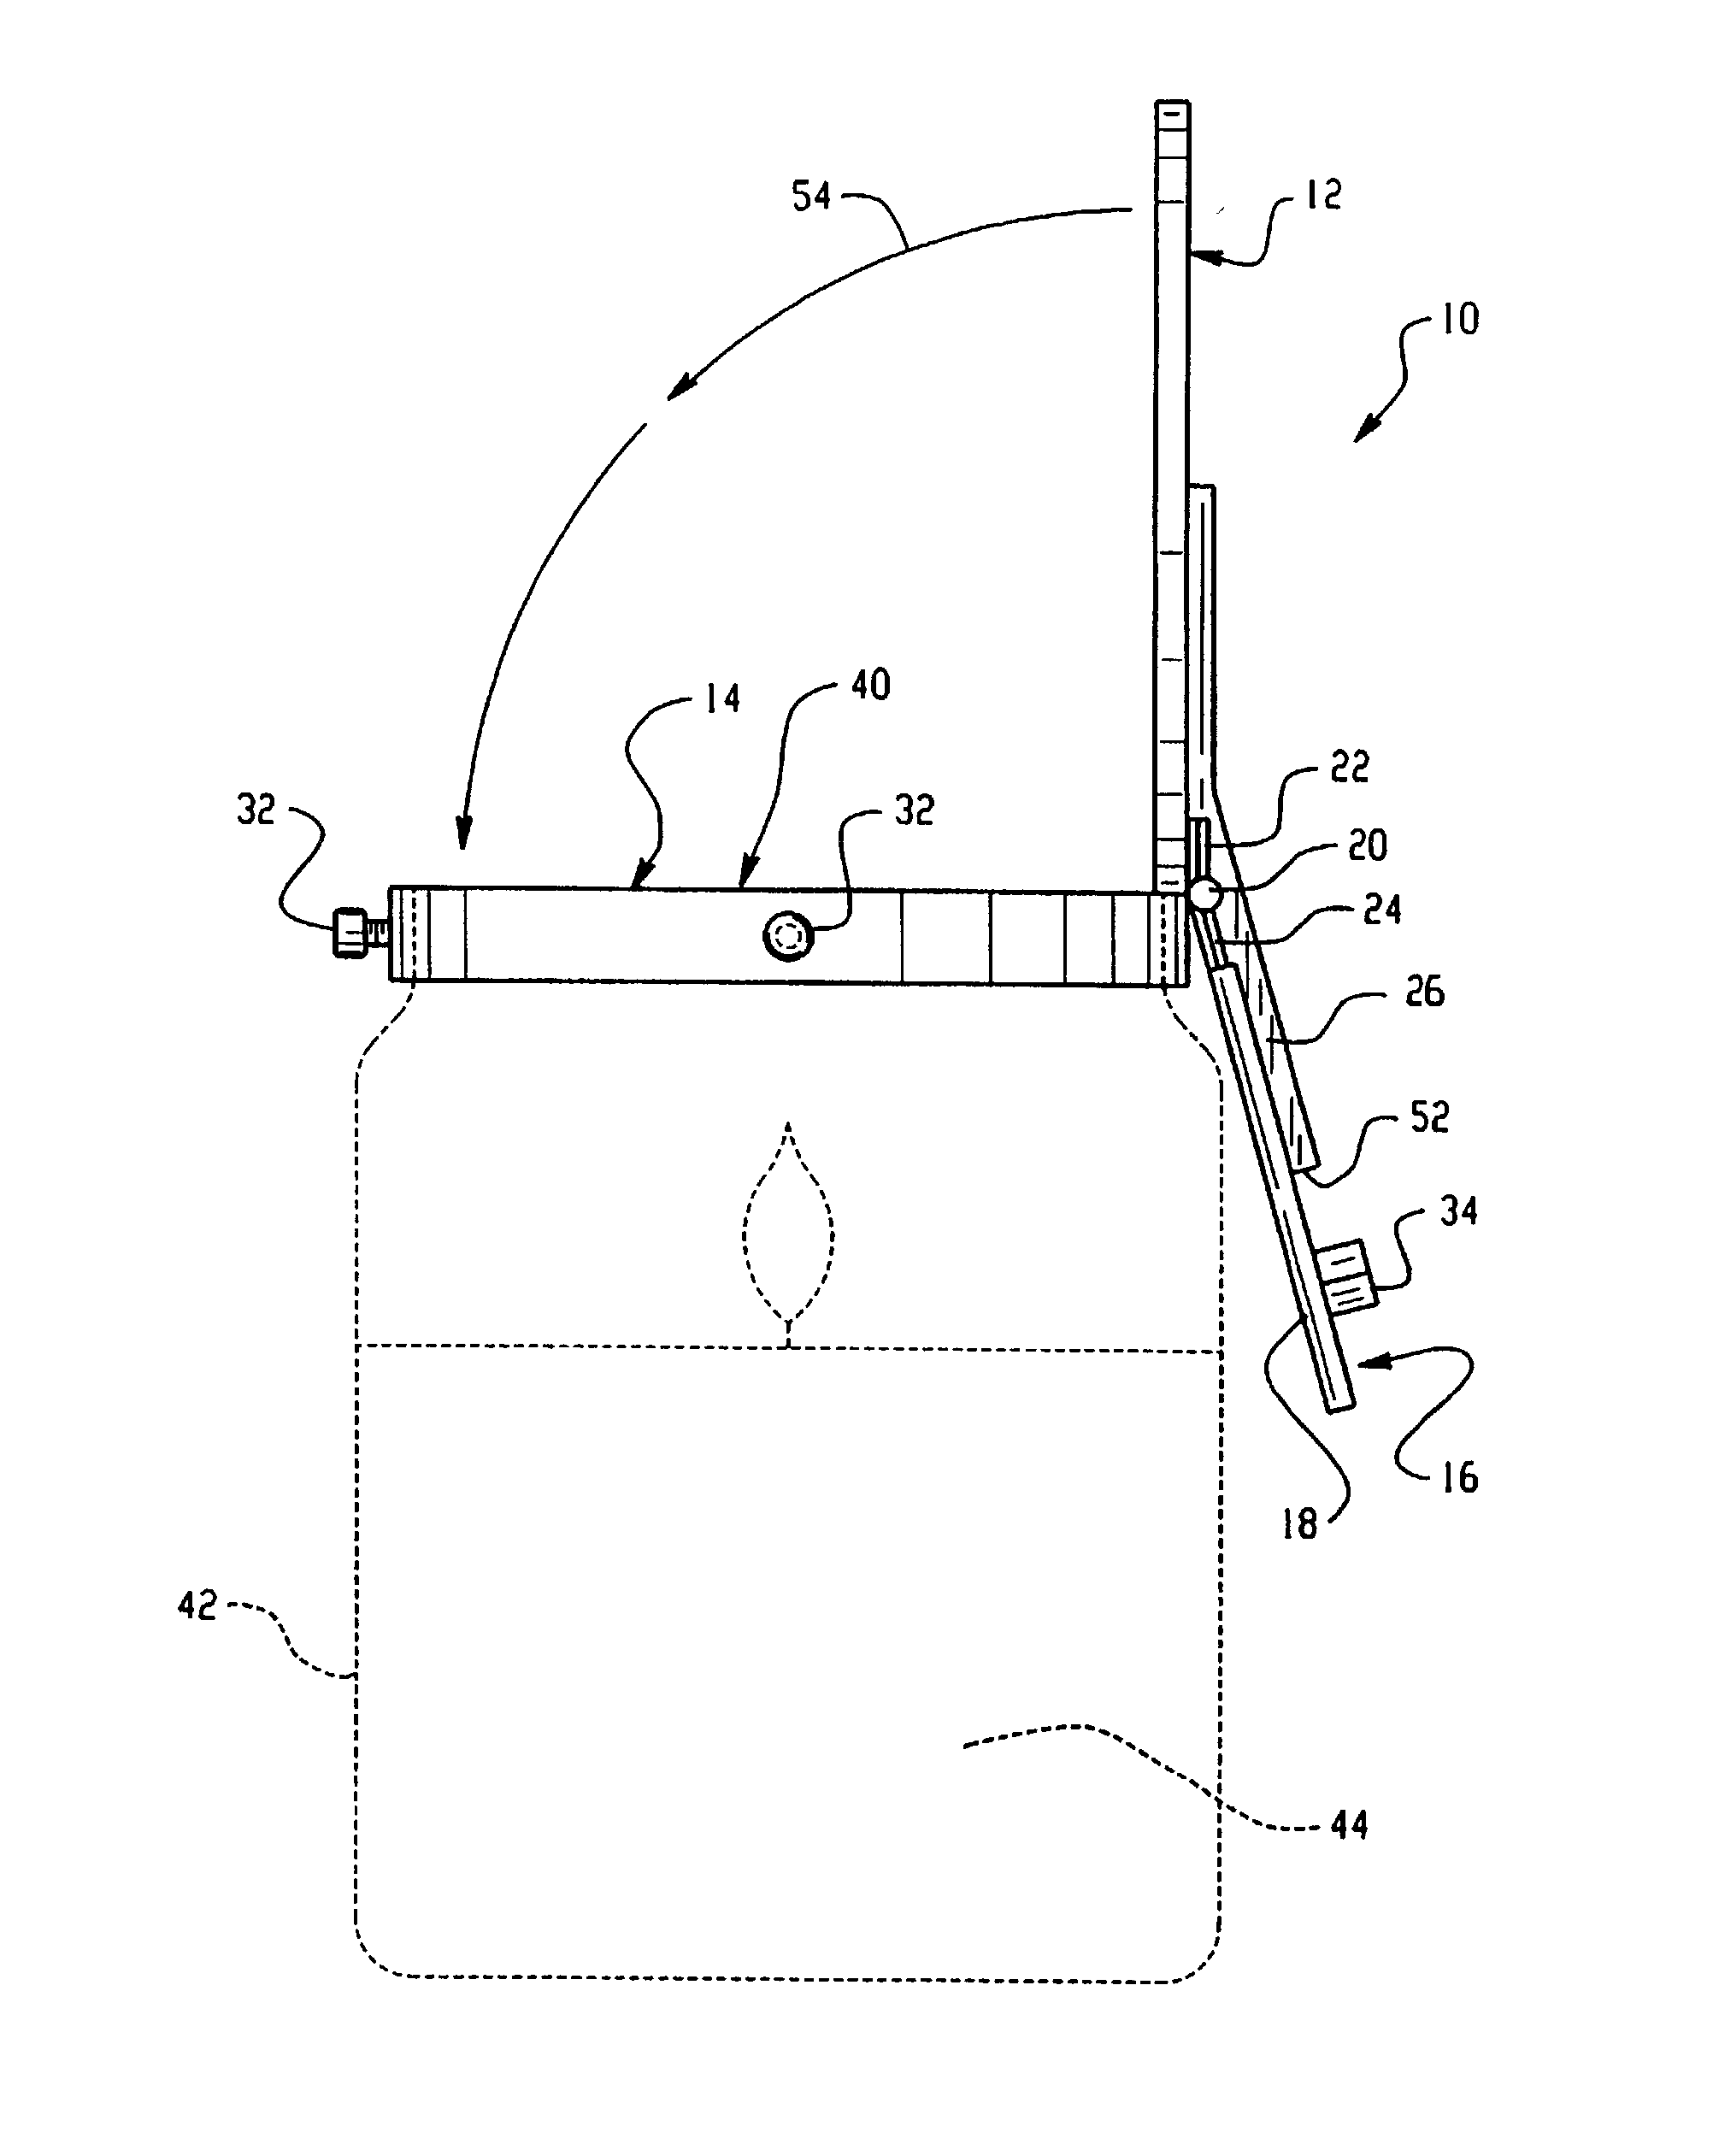 System and method to automatically extinguish a candle